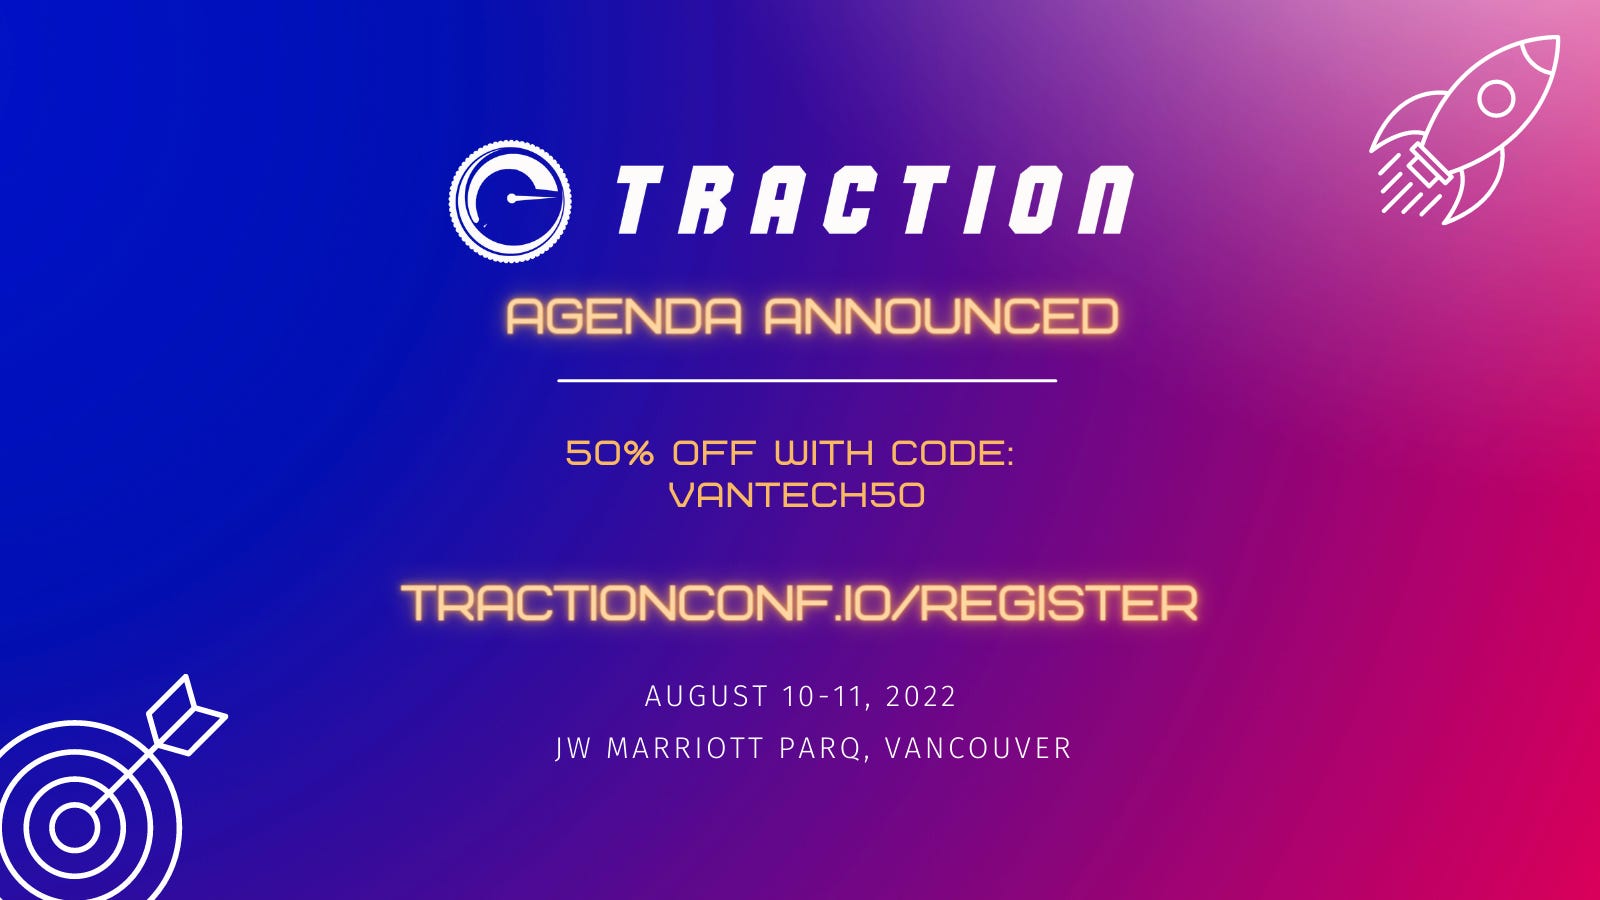 Traction Conference to feature founders and leaders from Silicon Valley